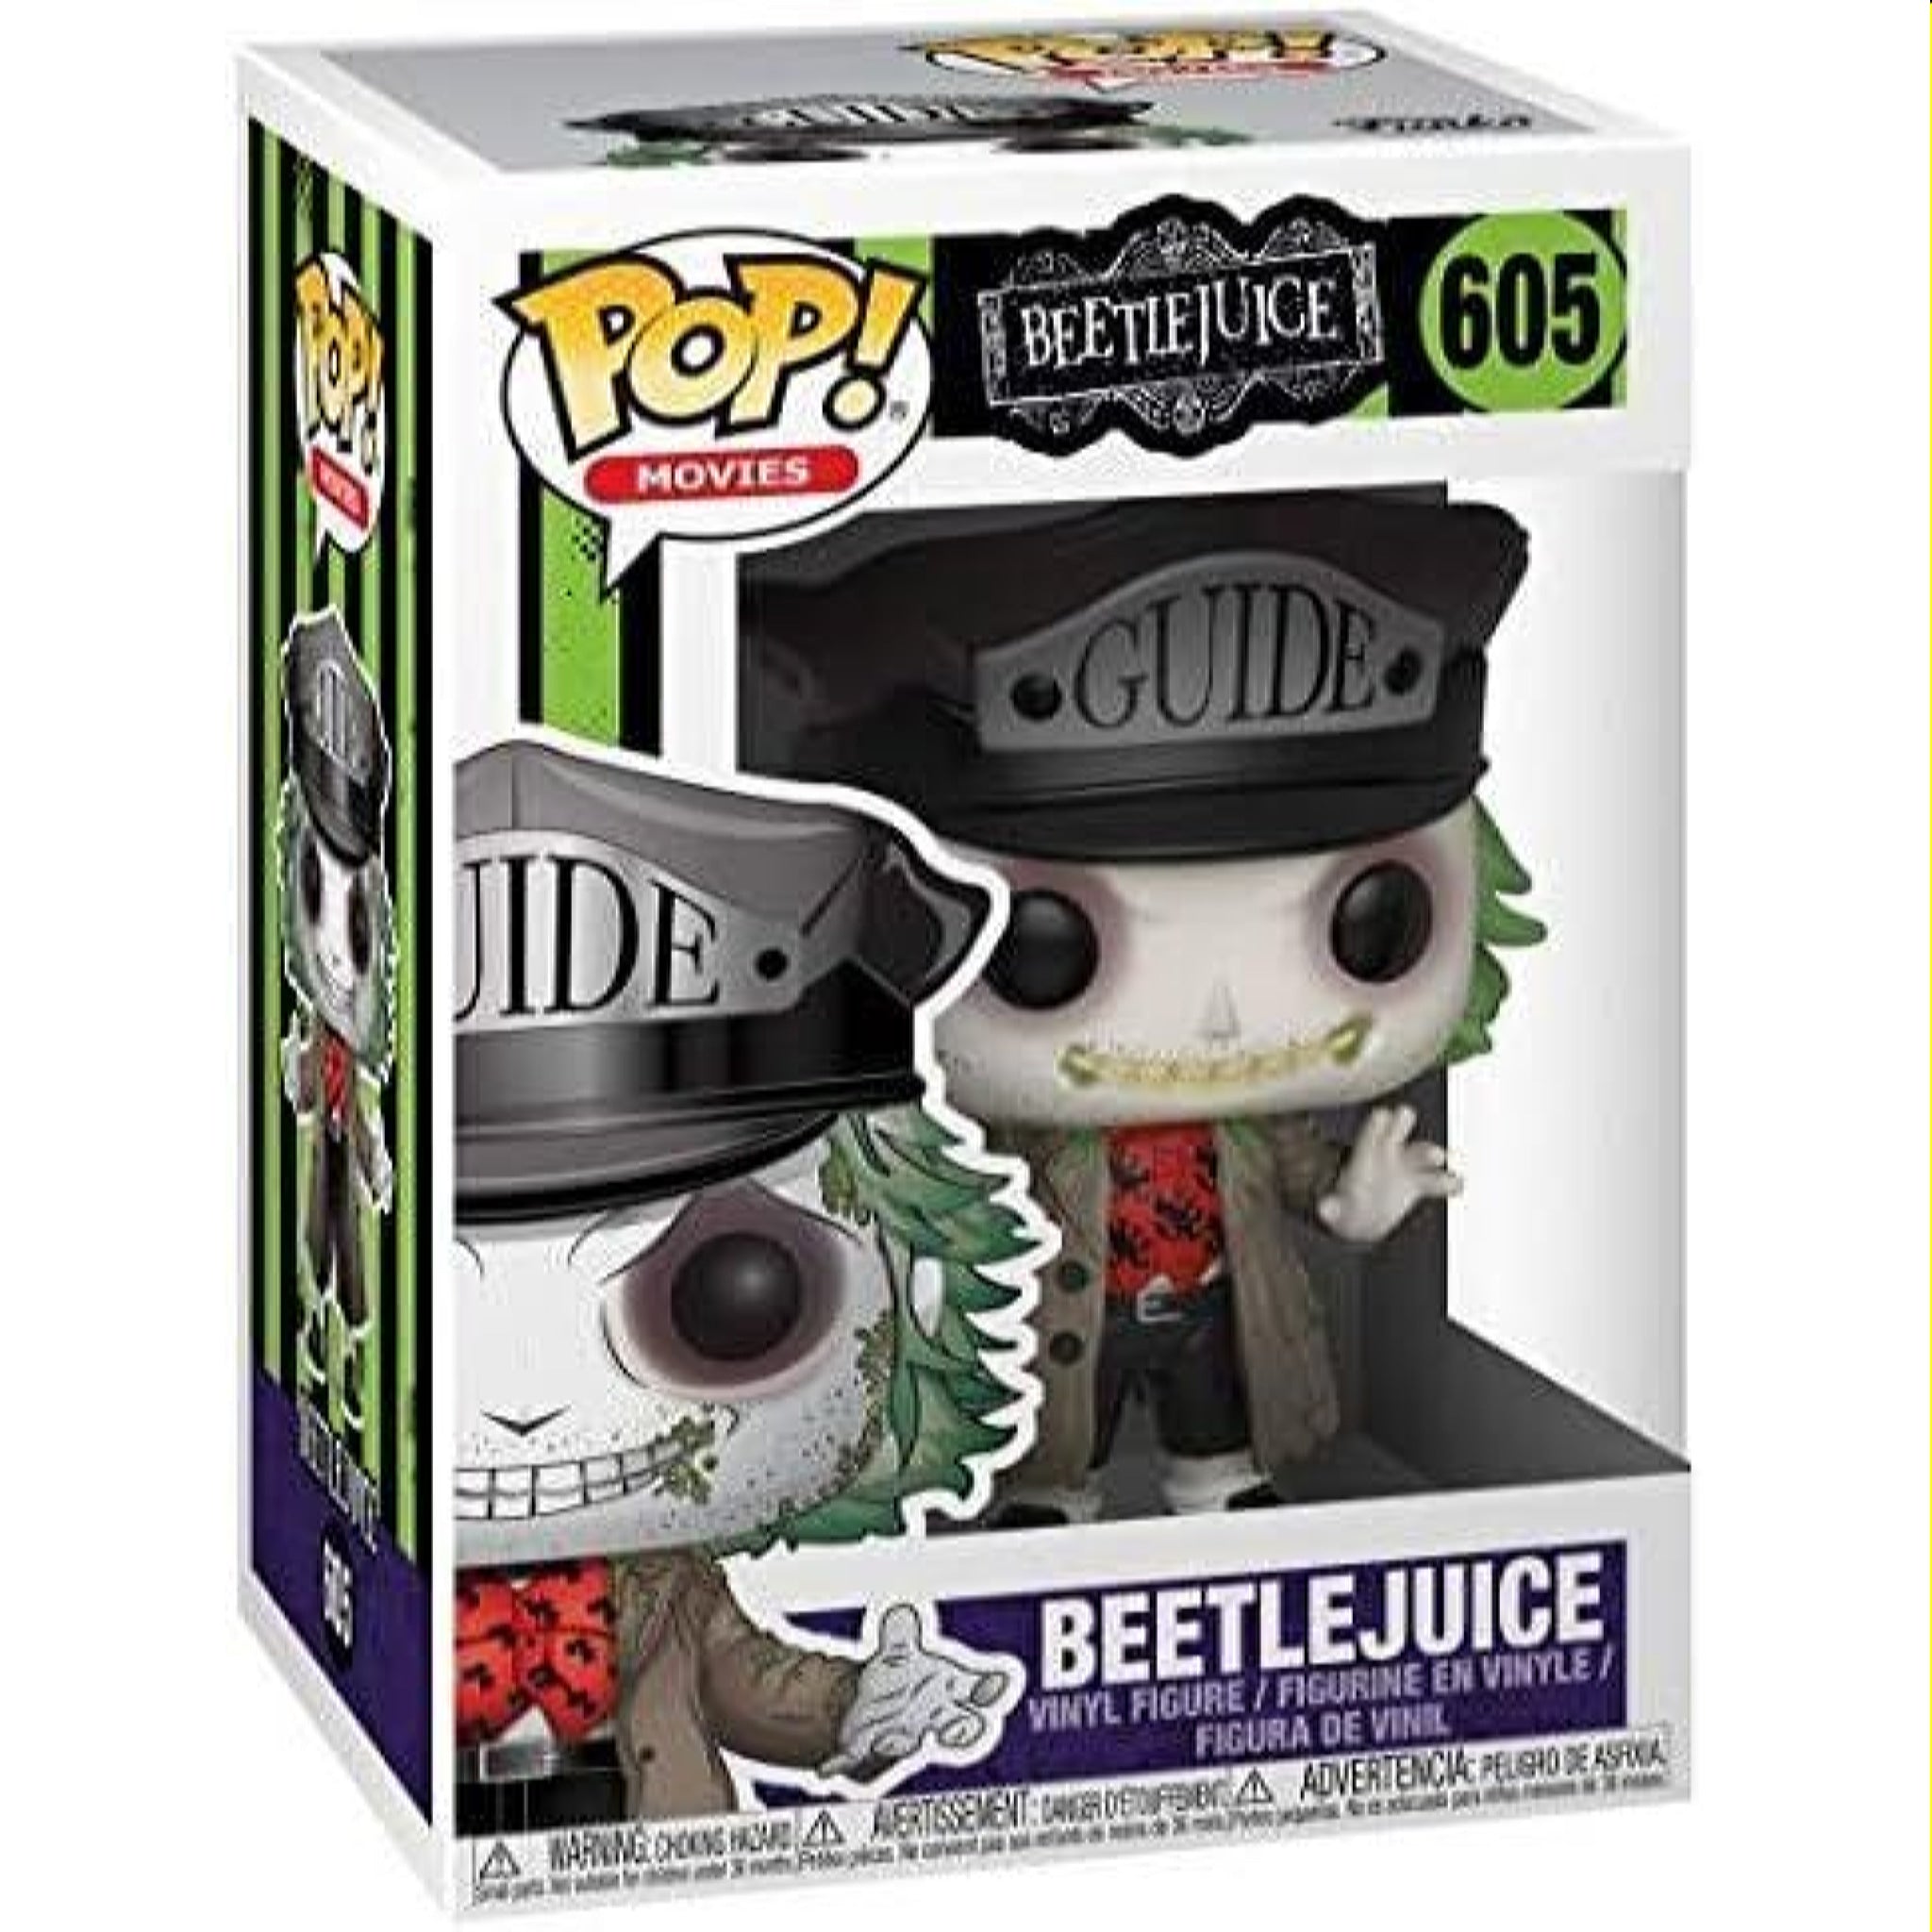 Beetlejuice with Guide Hat Funko Pop! Movies Vinyl Figure DAMAGED BOX